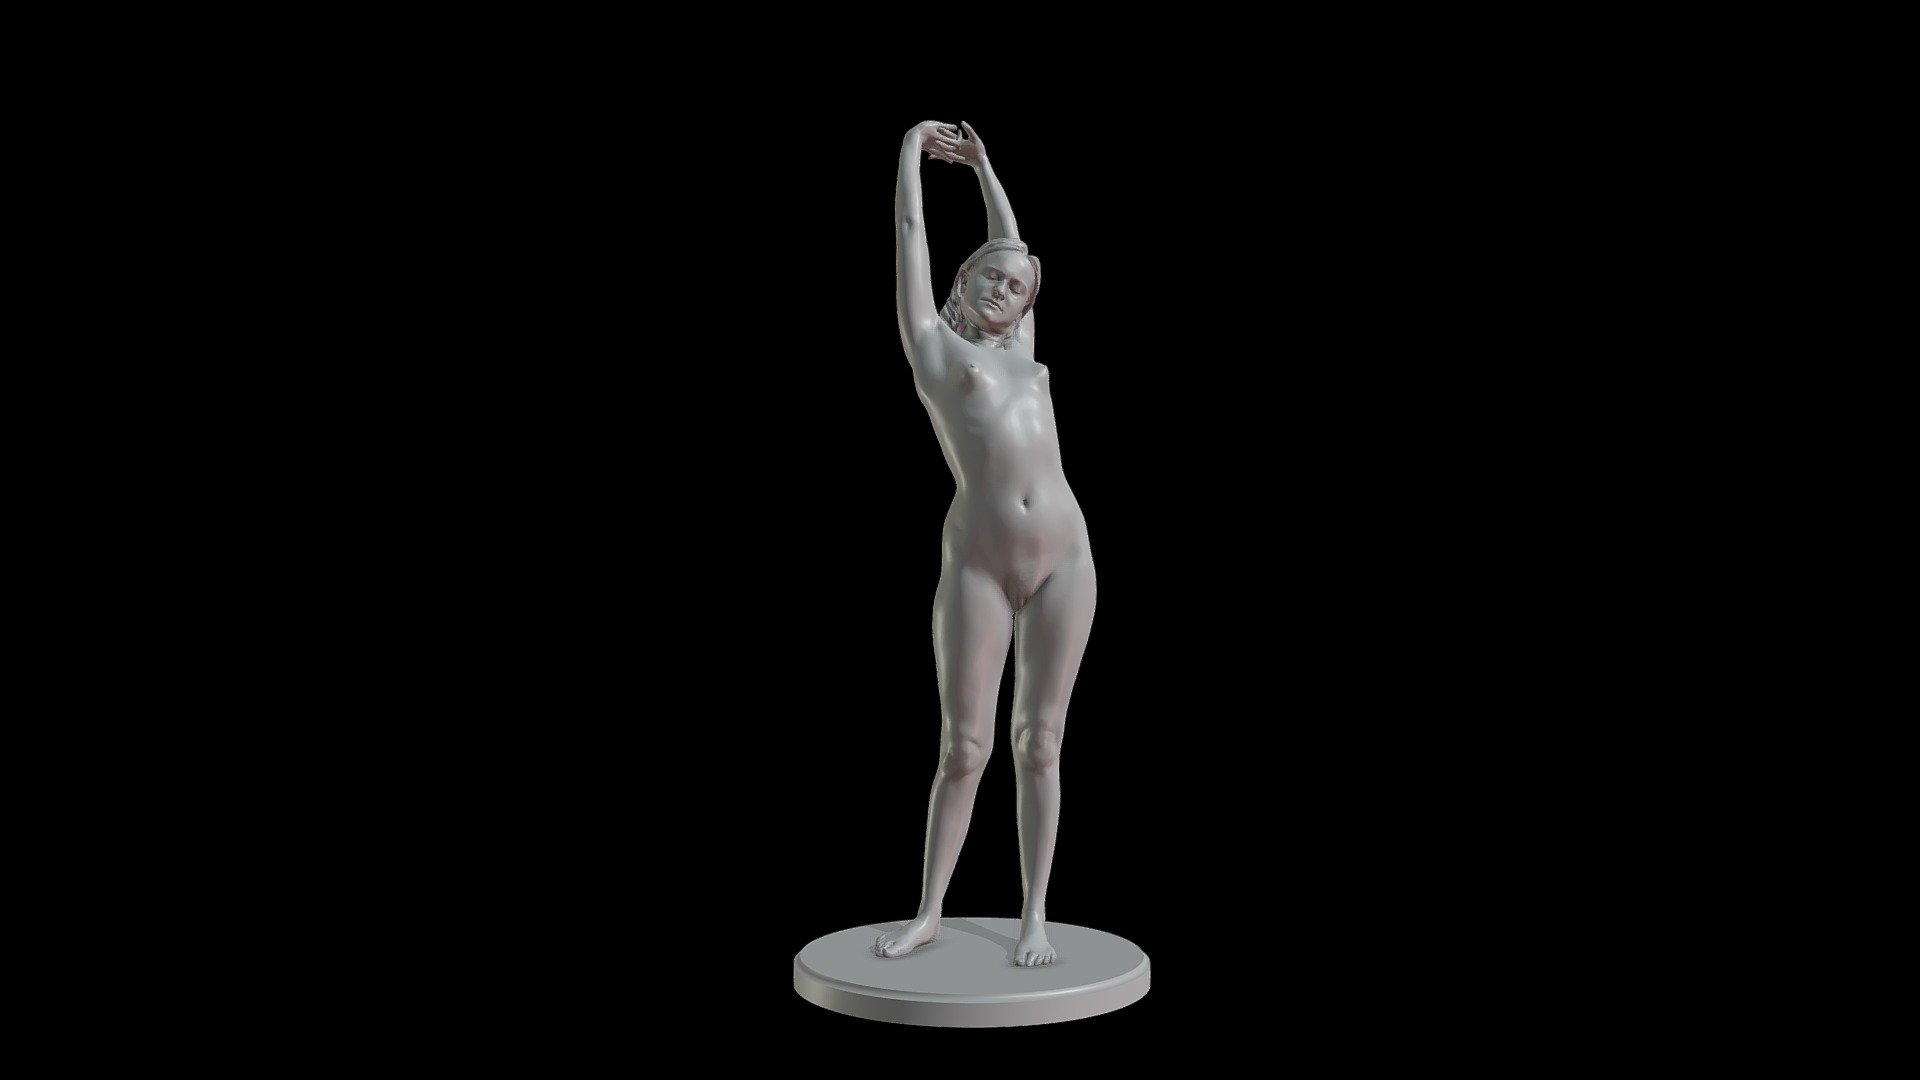 Eve 01-020- Figurine version

Another pose for this expressive model

Other models and poses at another-gallery

This model has been scanned by  another-me.fr - Eve_01-020_figurine - 3D model by Another-me (@fredlucazeau) 3d model